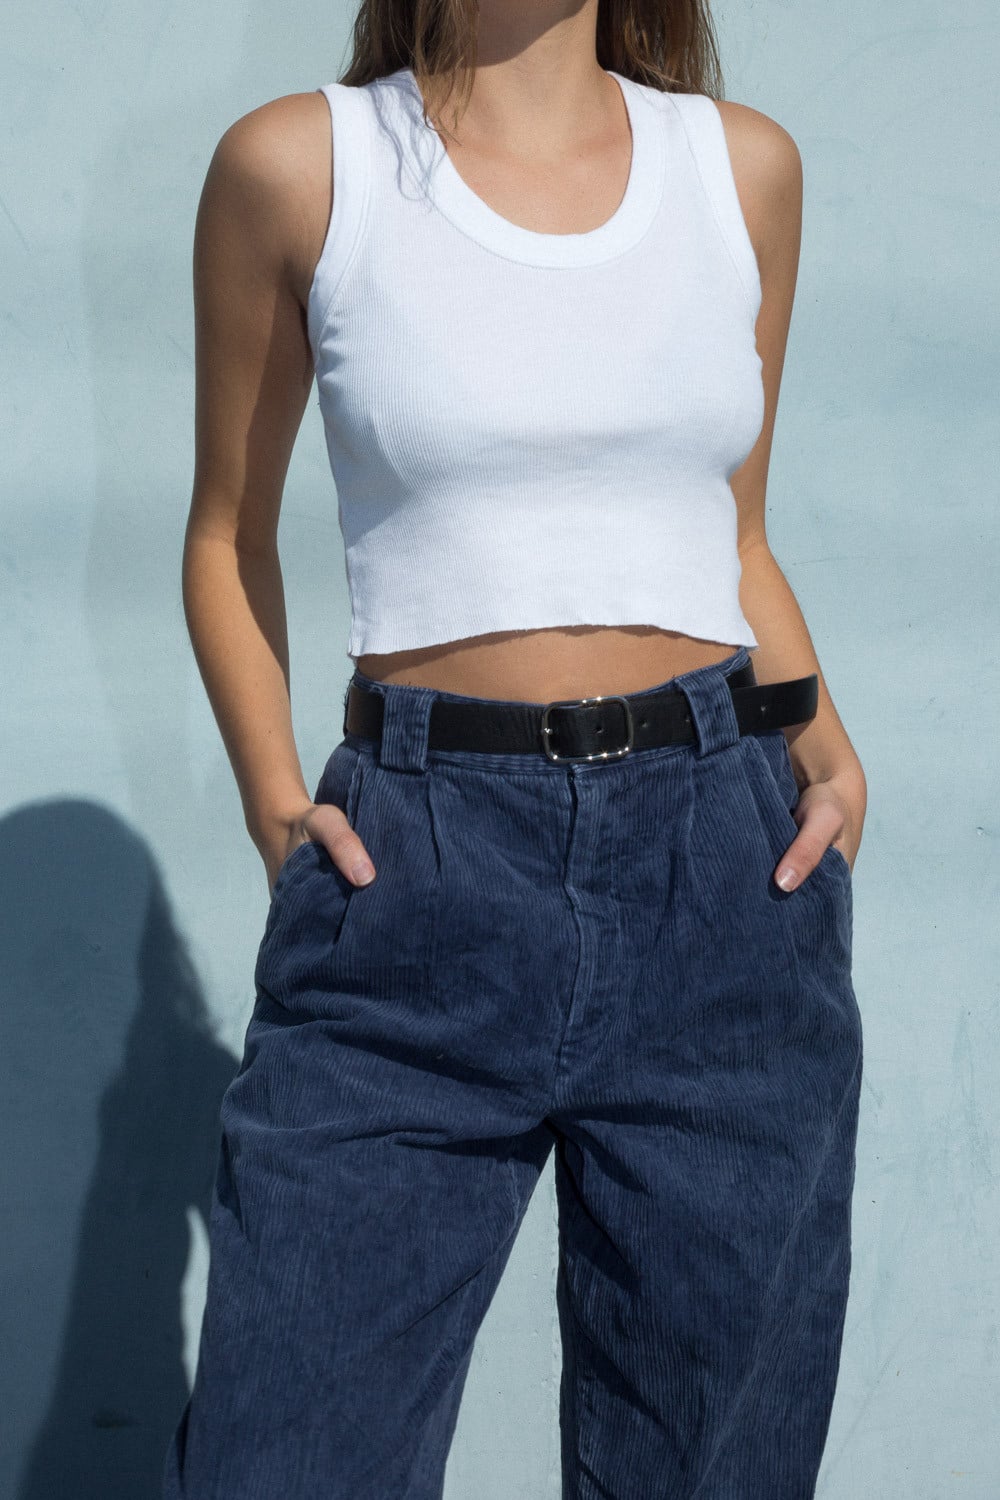 Brandy Melville Crop Top Blue - $12 - From Paige